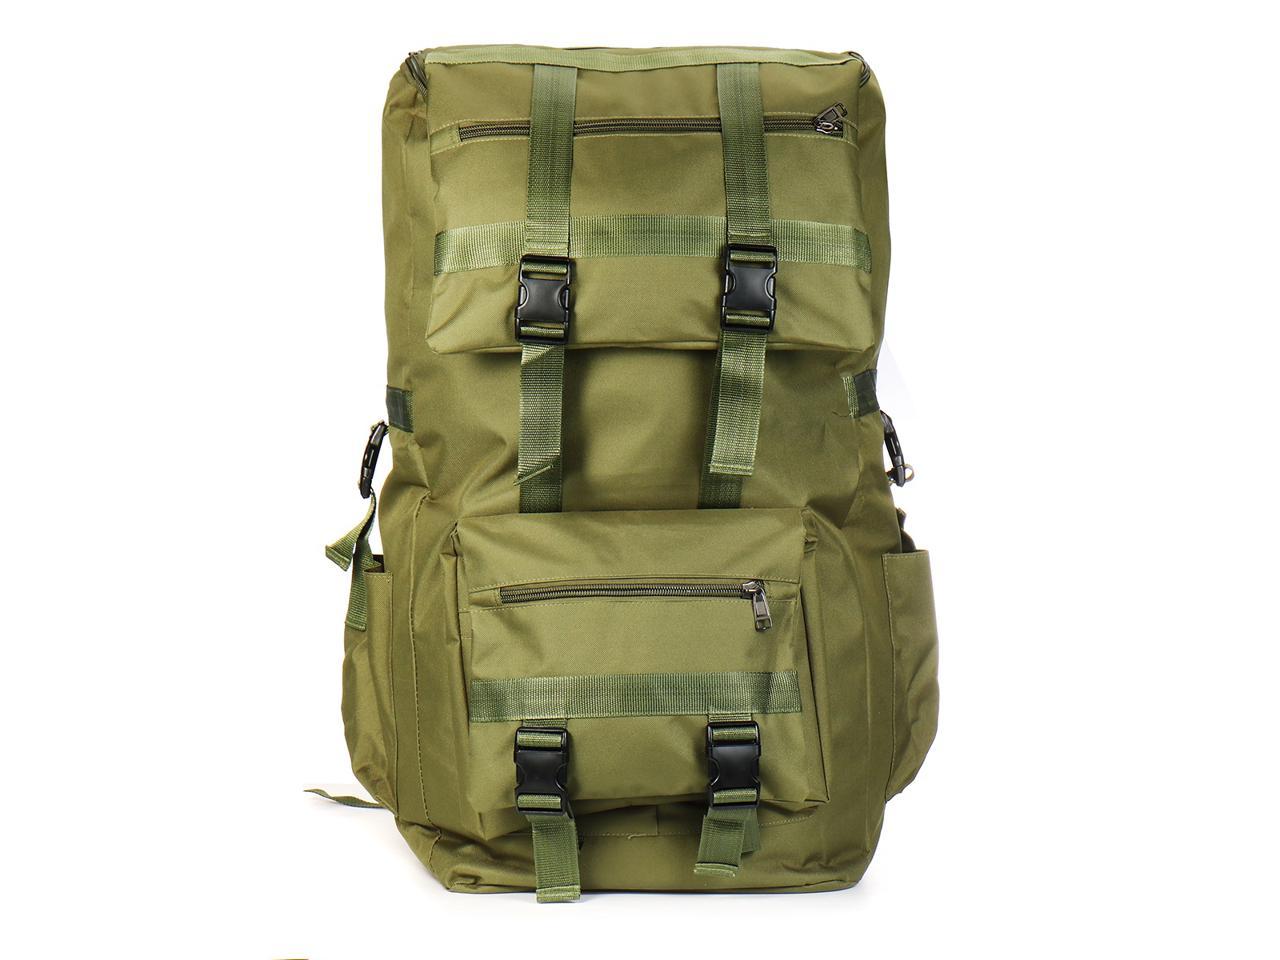 110L Military Tactical Backpack Outdoor Camping Hiking Travel Rucksack Luggage 